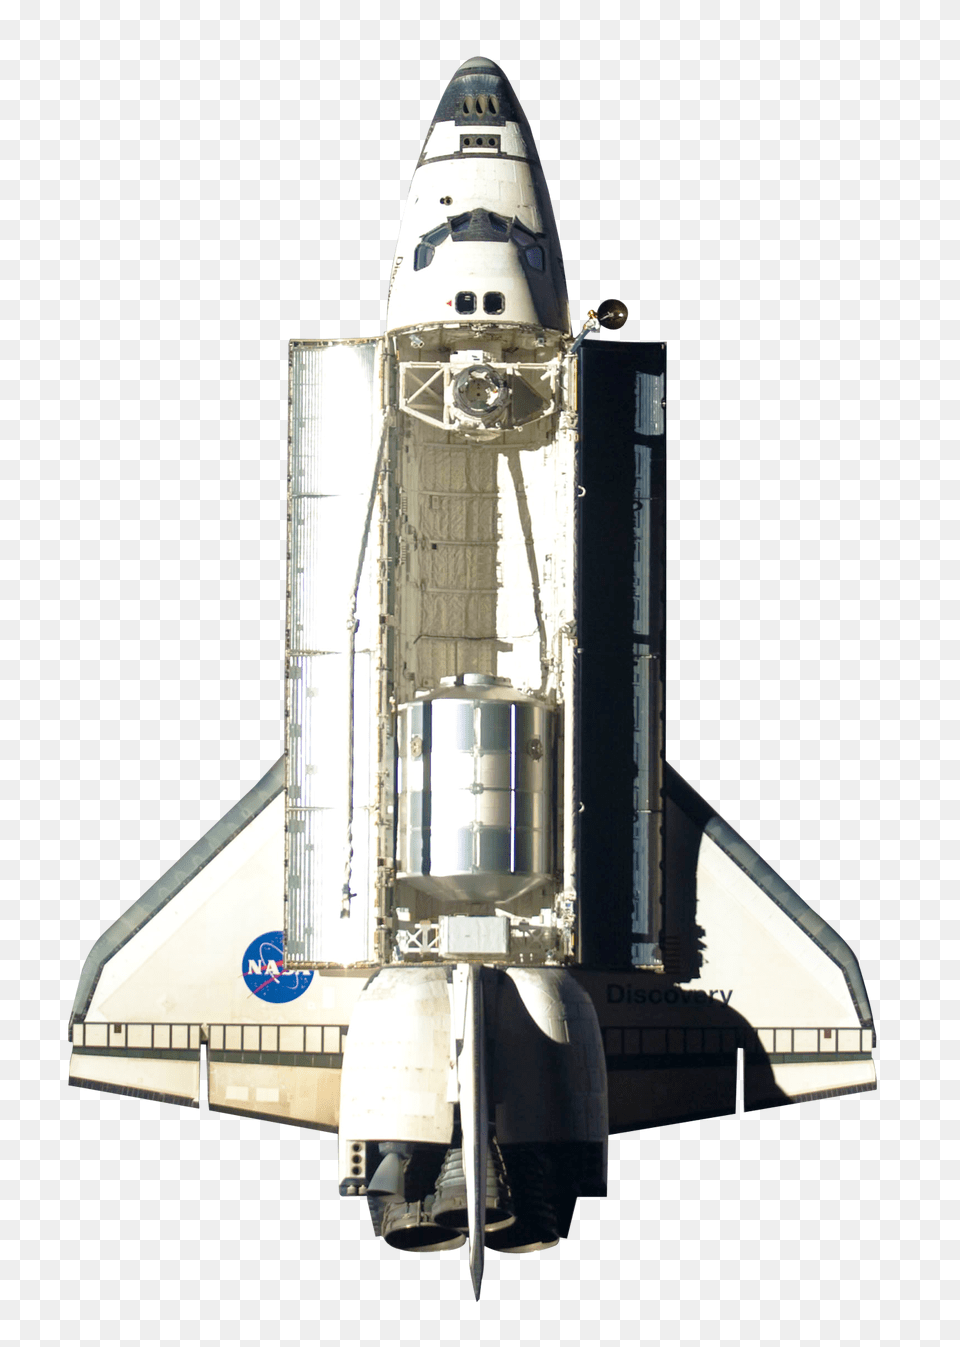 Download Space Image And Clipart Space Rocket, Aircraft, Space Shuttle, Spaceship, Transportation Free Transparent Png